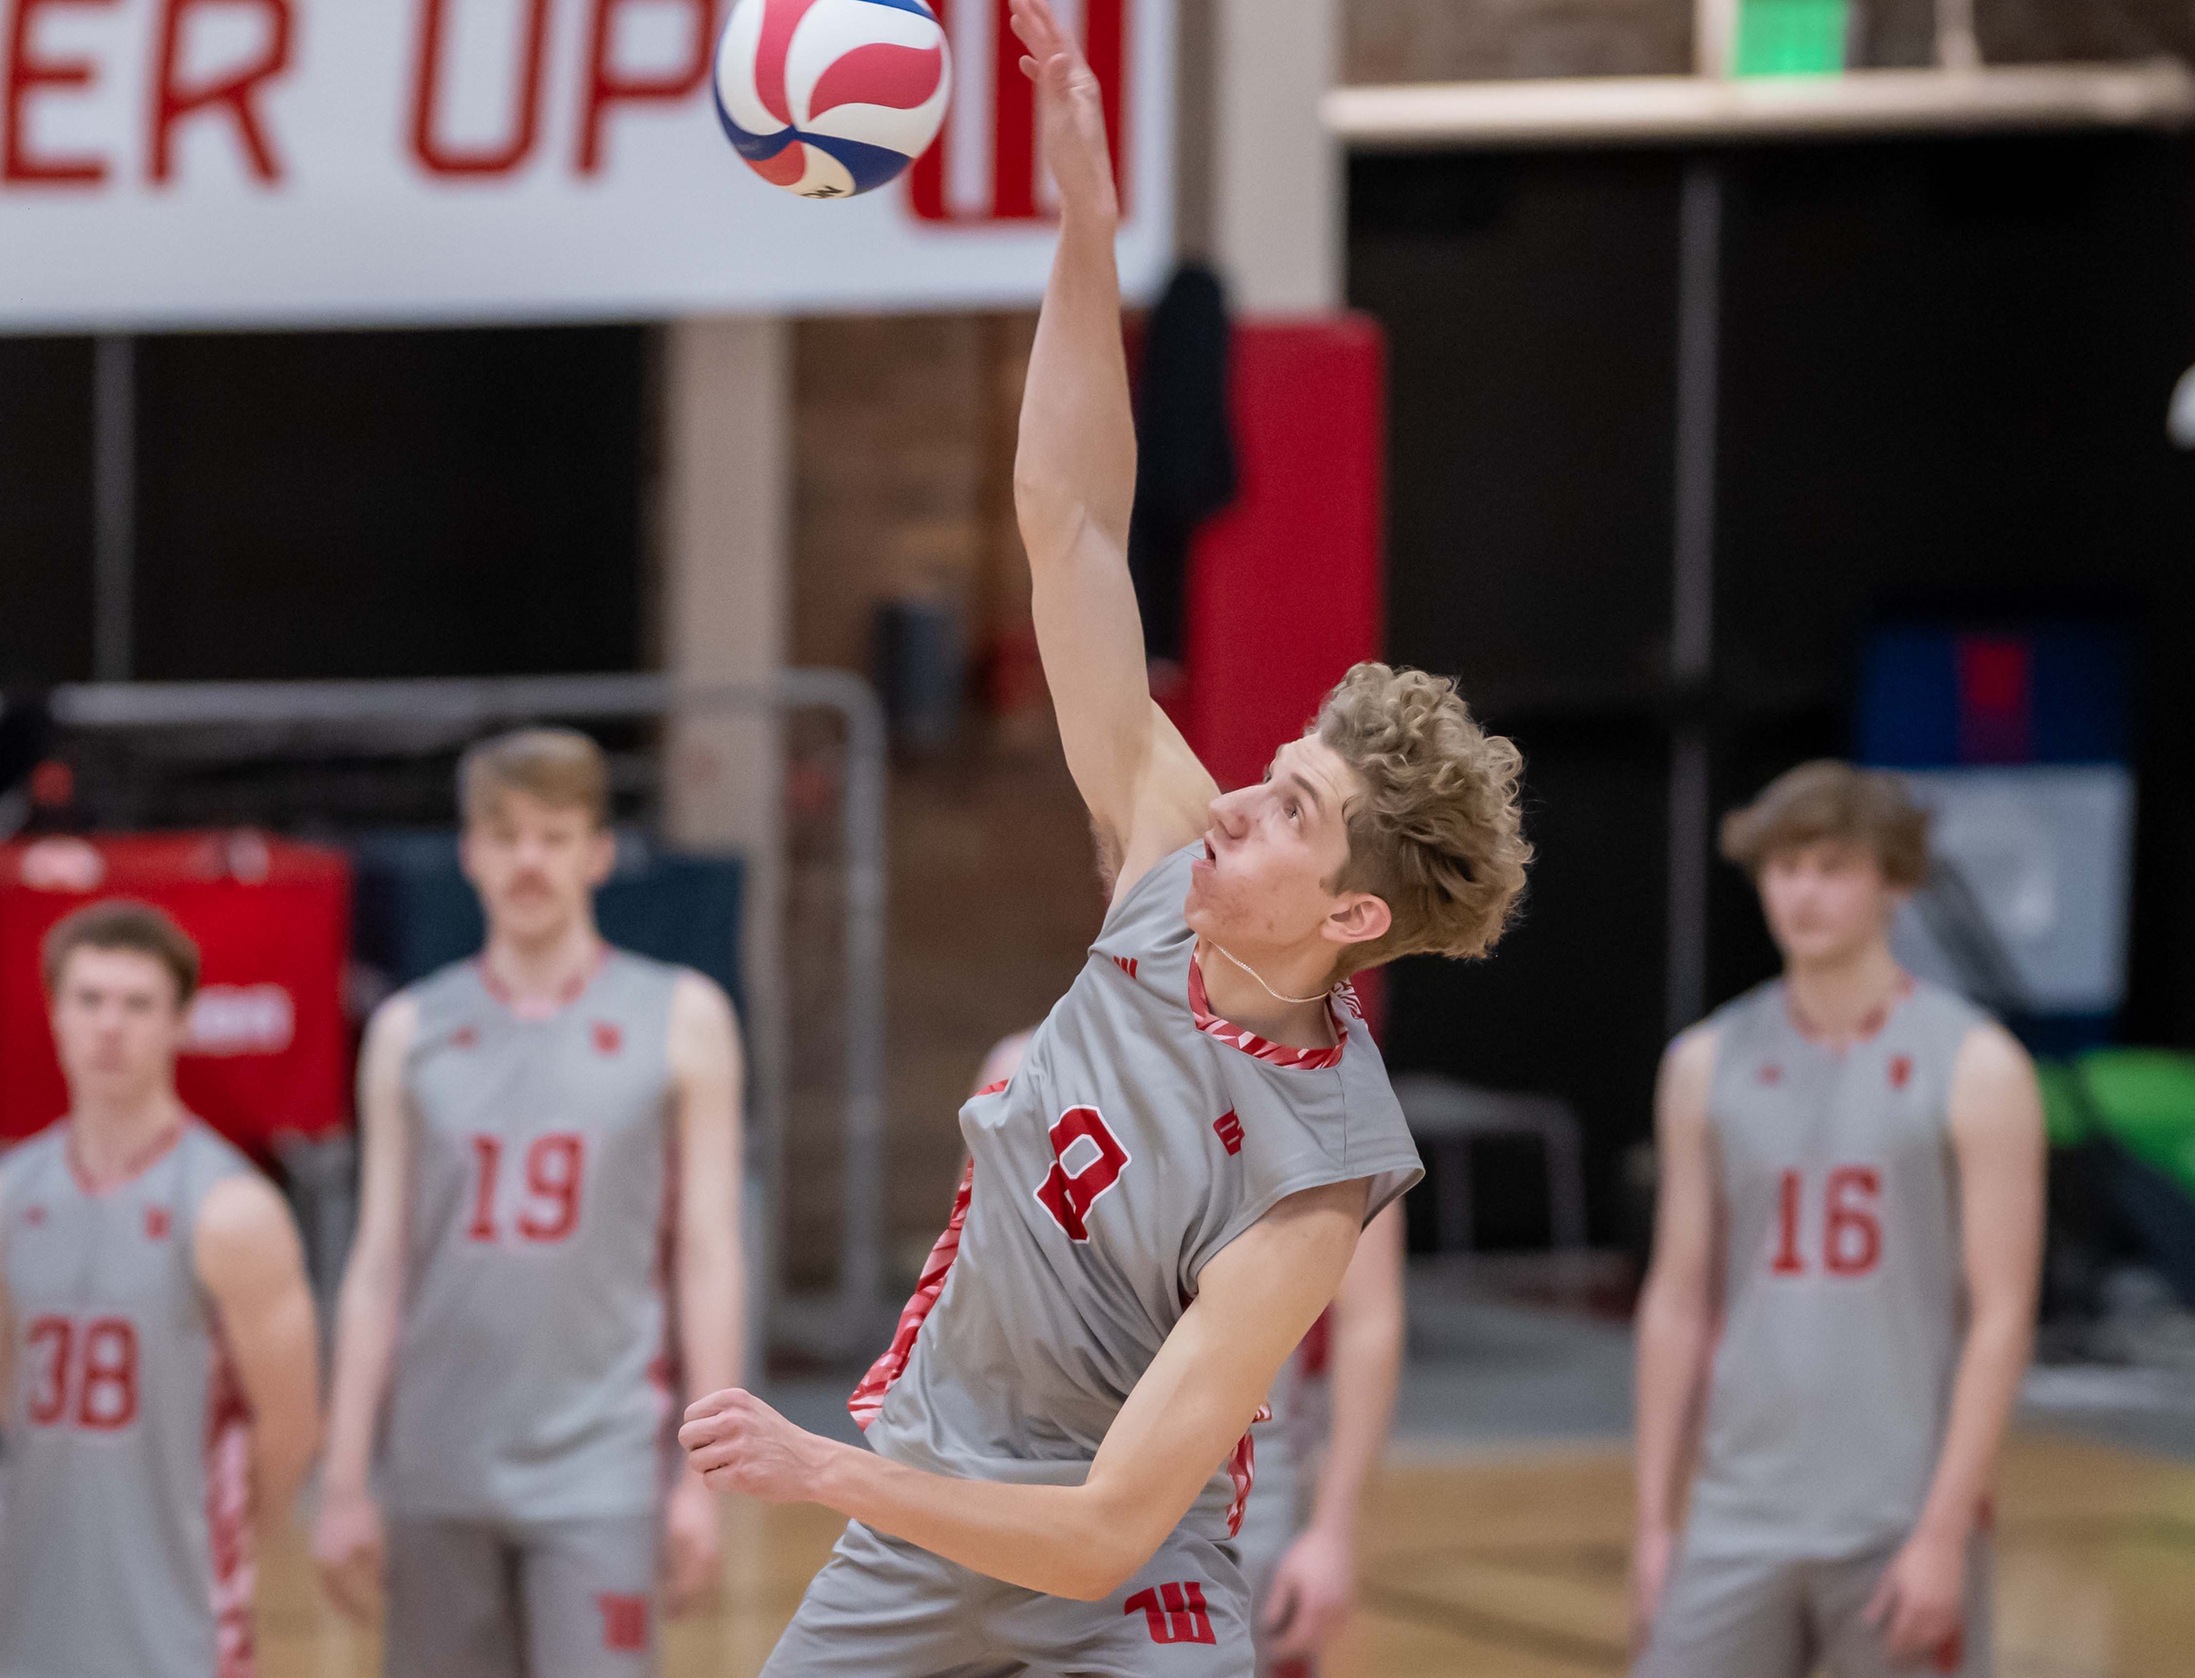 Men's Volleyball splits tri-match with Hiram and Wabash